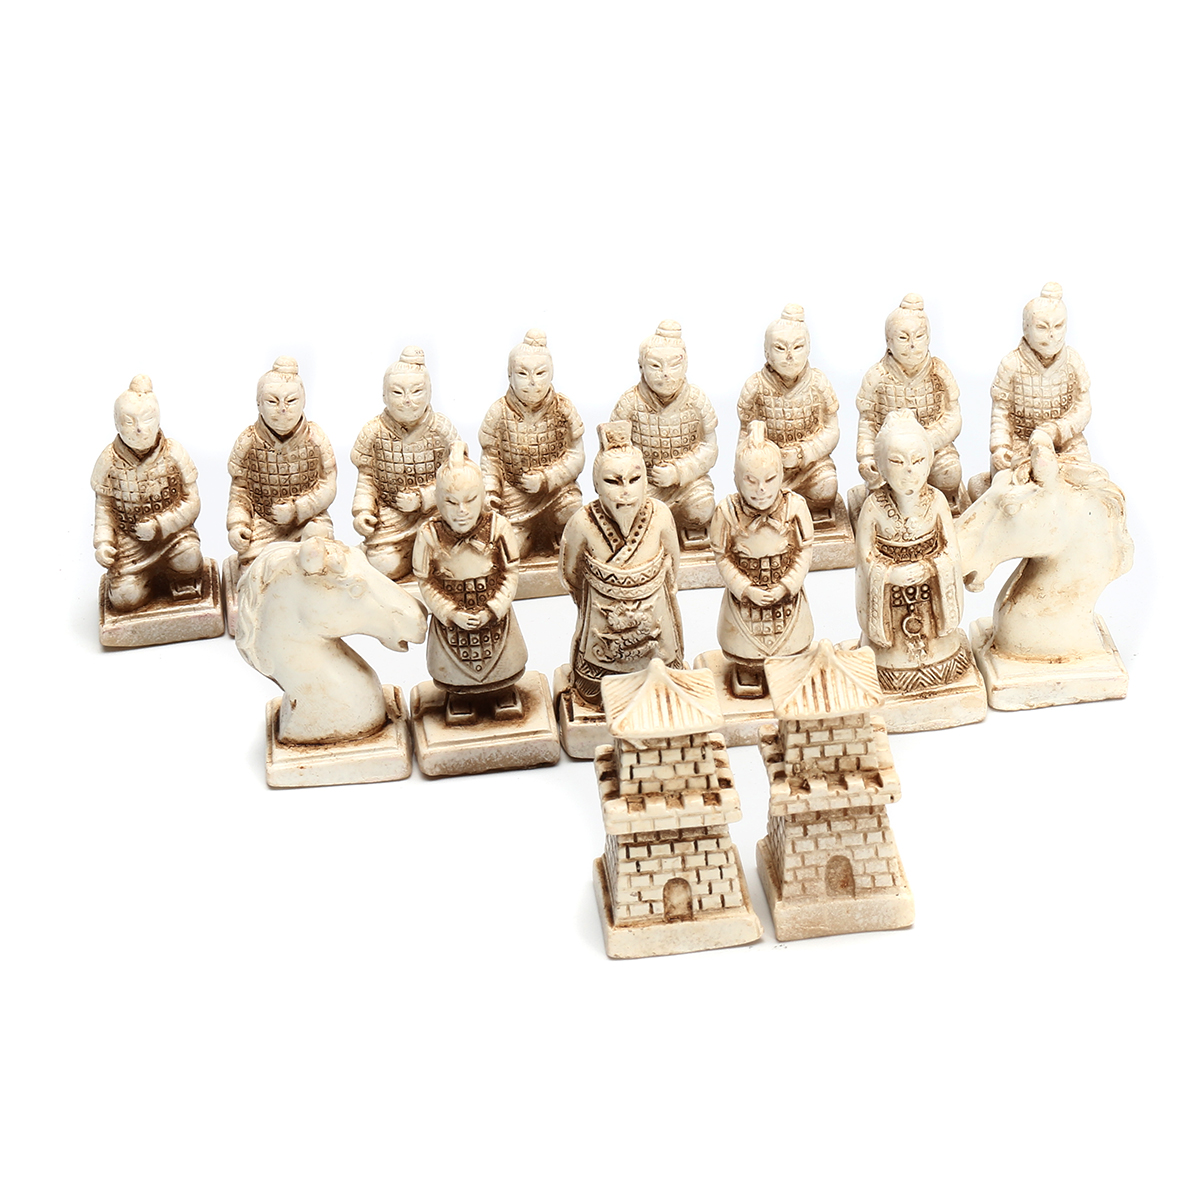 Vintage-Wooden-Chinese-Chess-Board-Table-Game-Set-Pieces-Gift-Toy-Collectibles-1454841-6